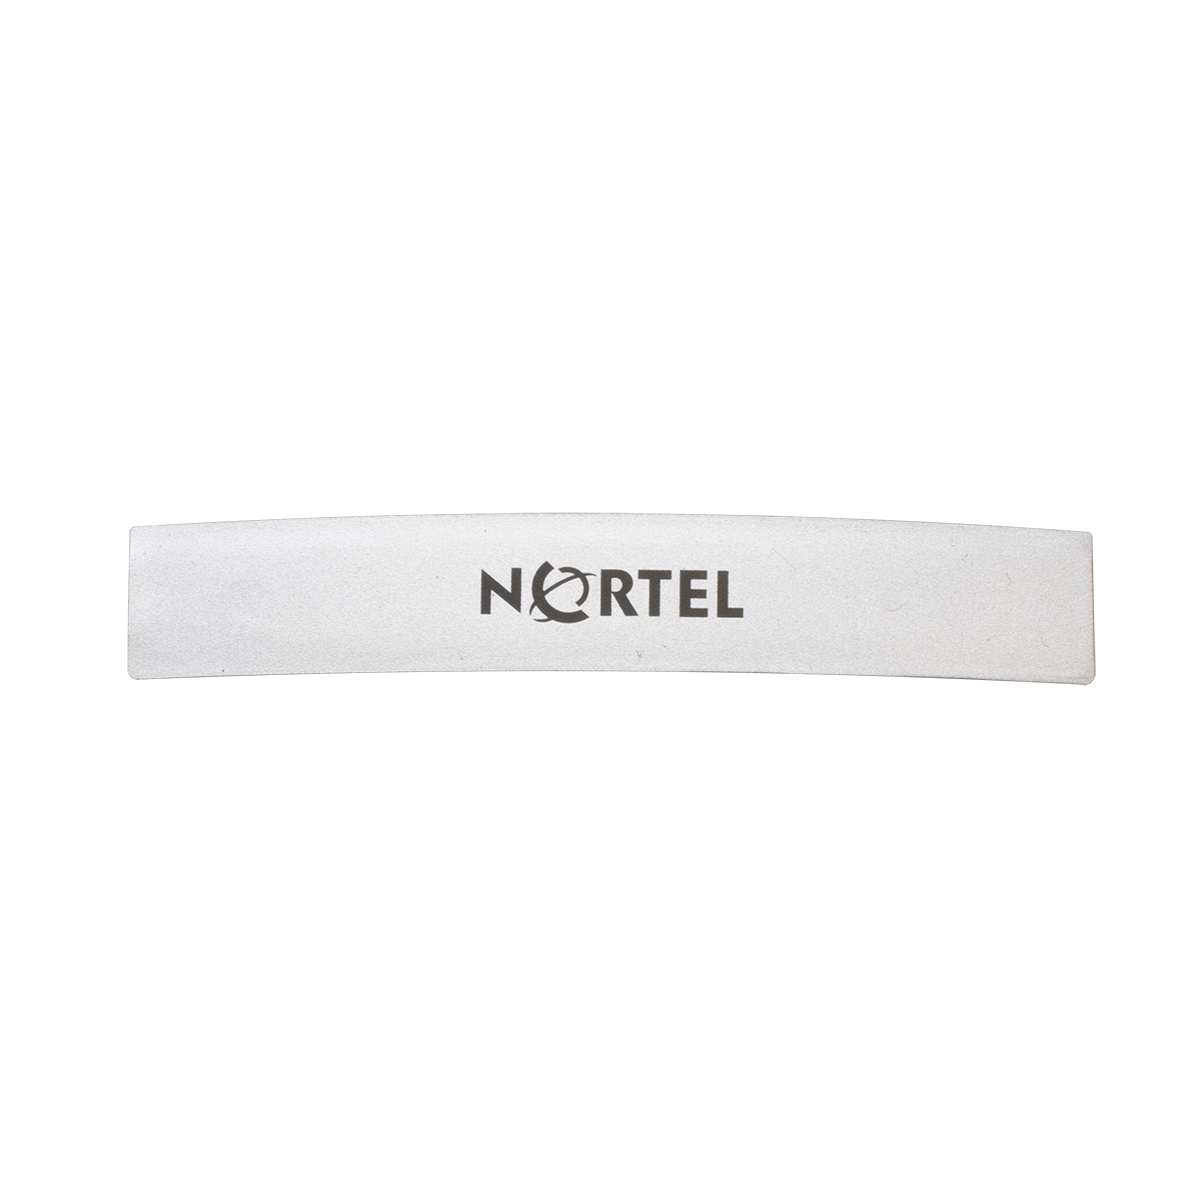 NORTEL, IP, 1120E, FITS ON 1120E FACEPLATE